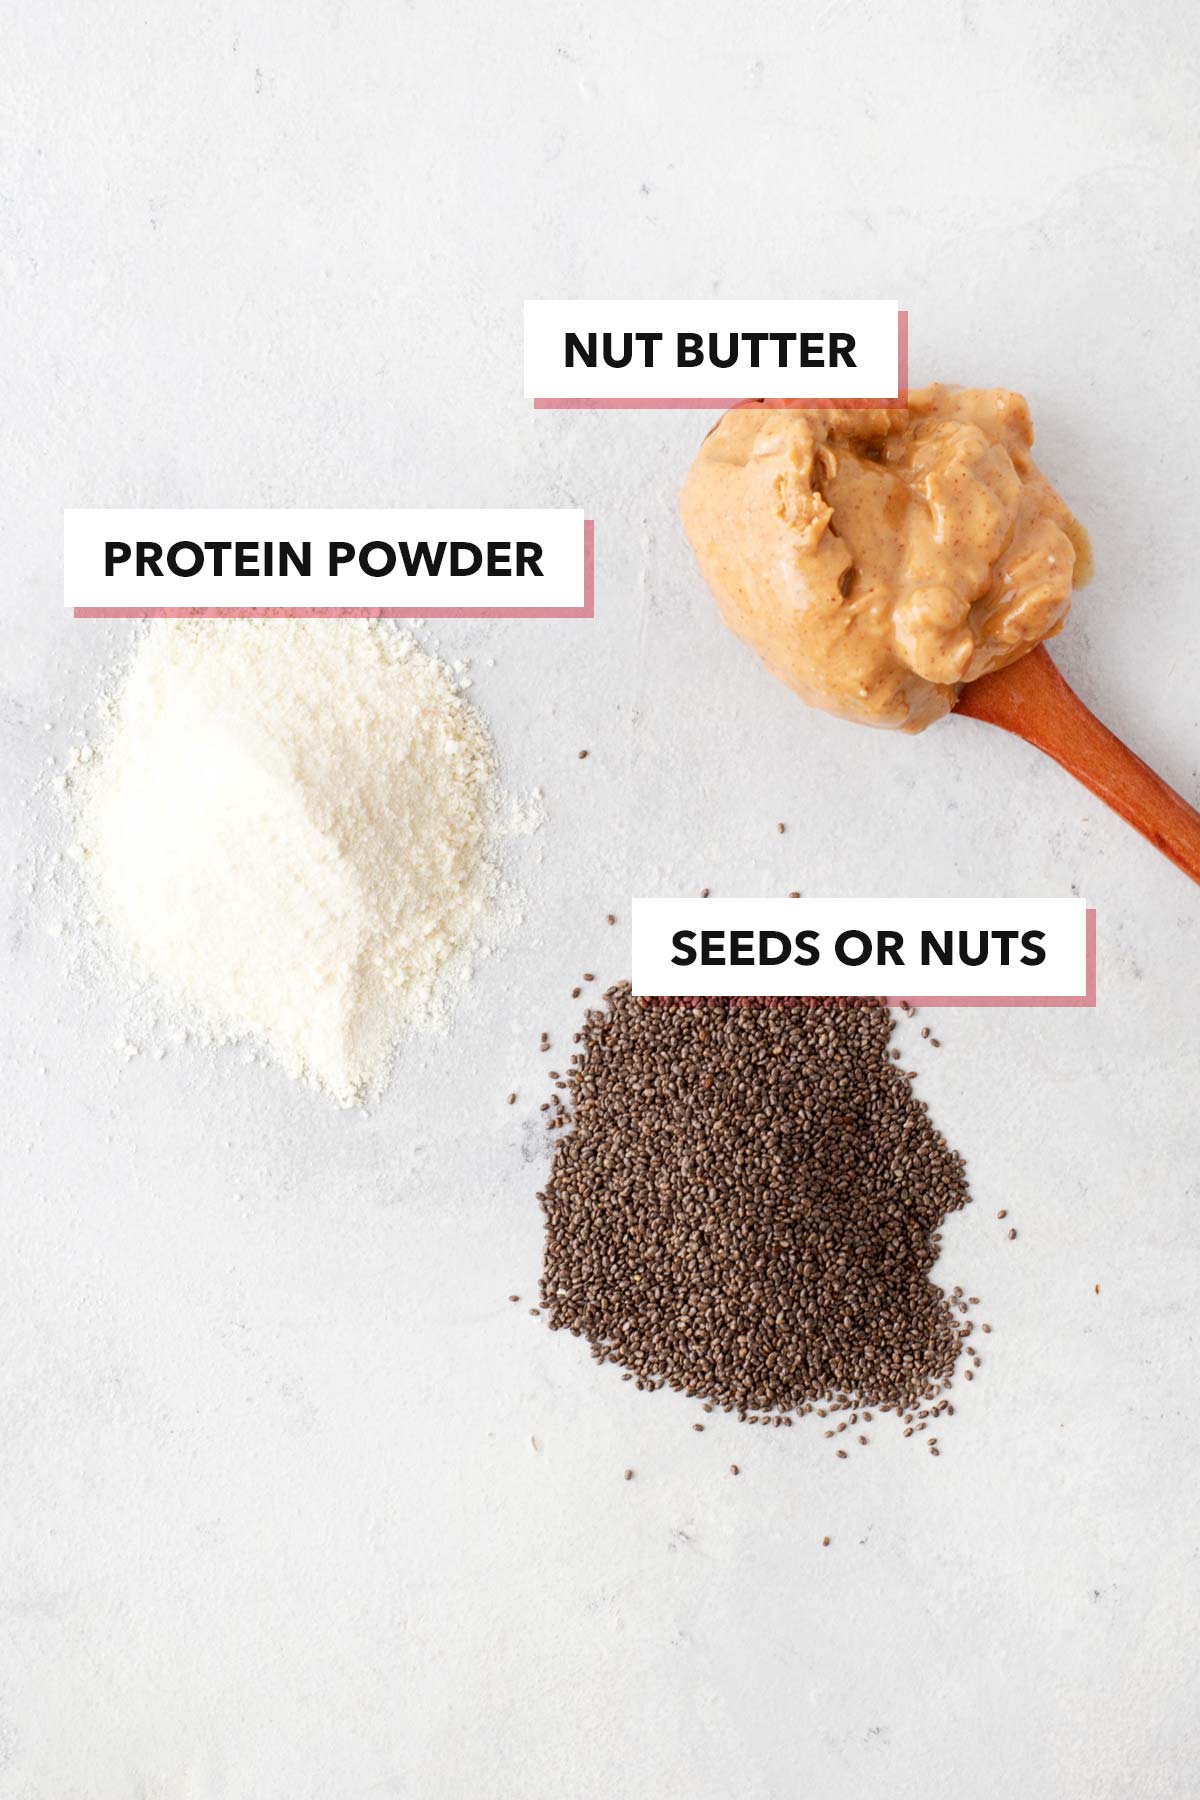 Add-in ingredients for a basic smoothie recipe.